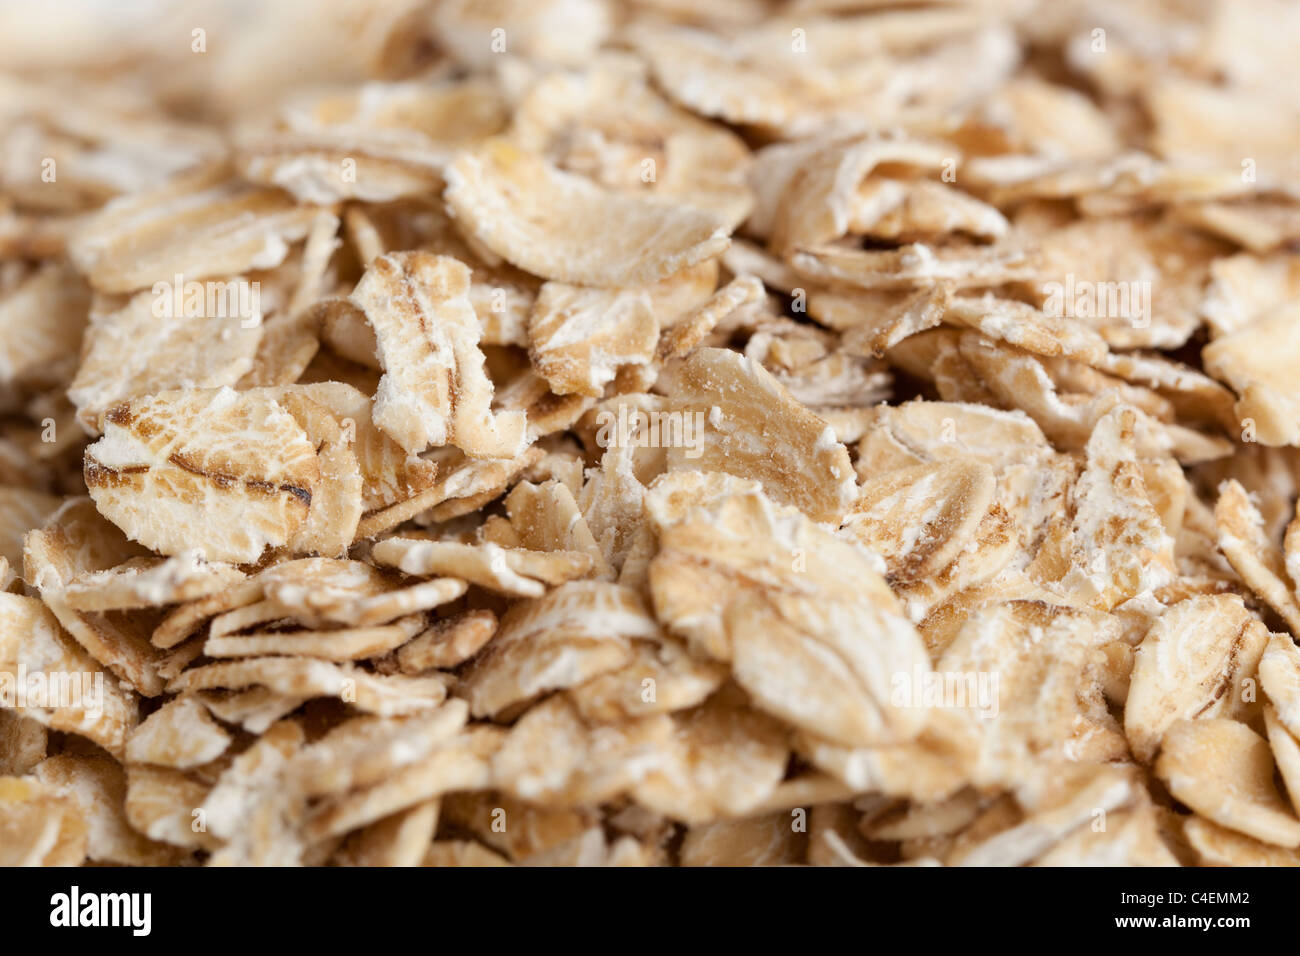 Dry oatmeal against a white background Stock Photo